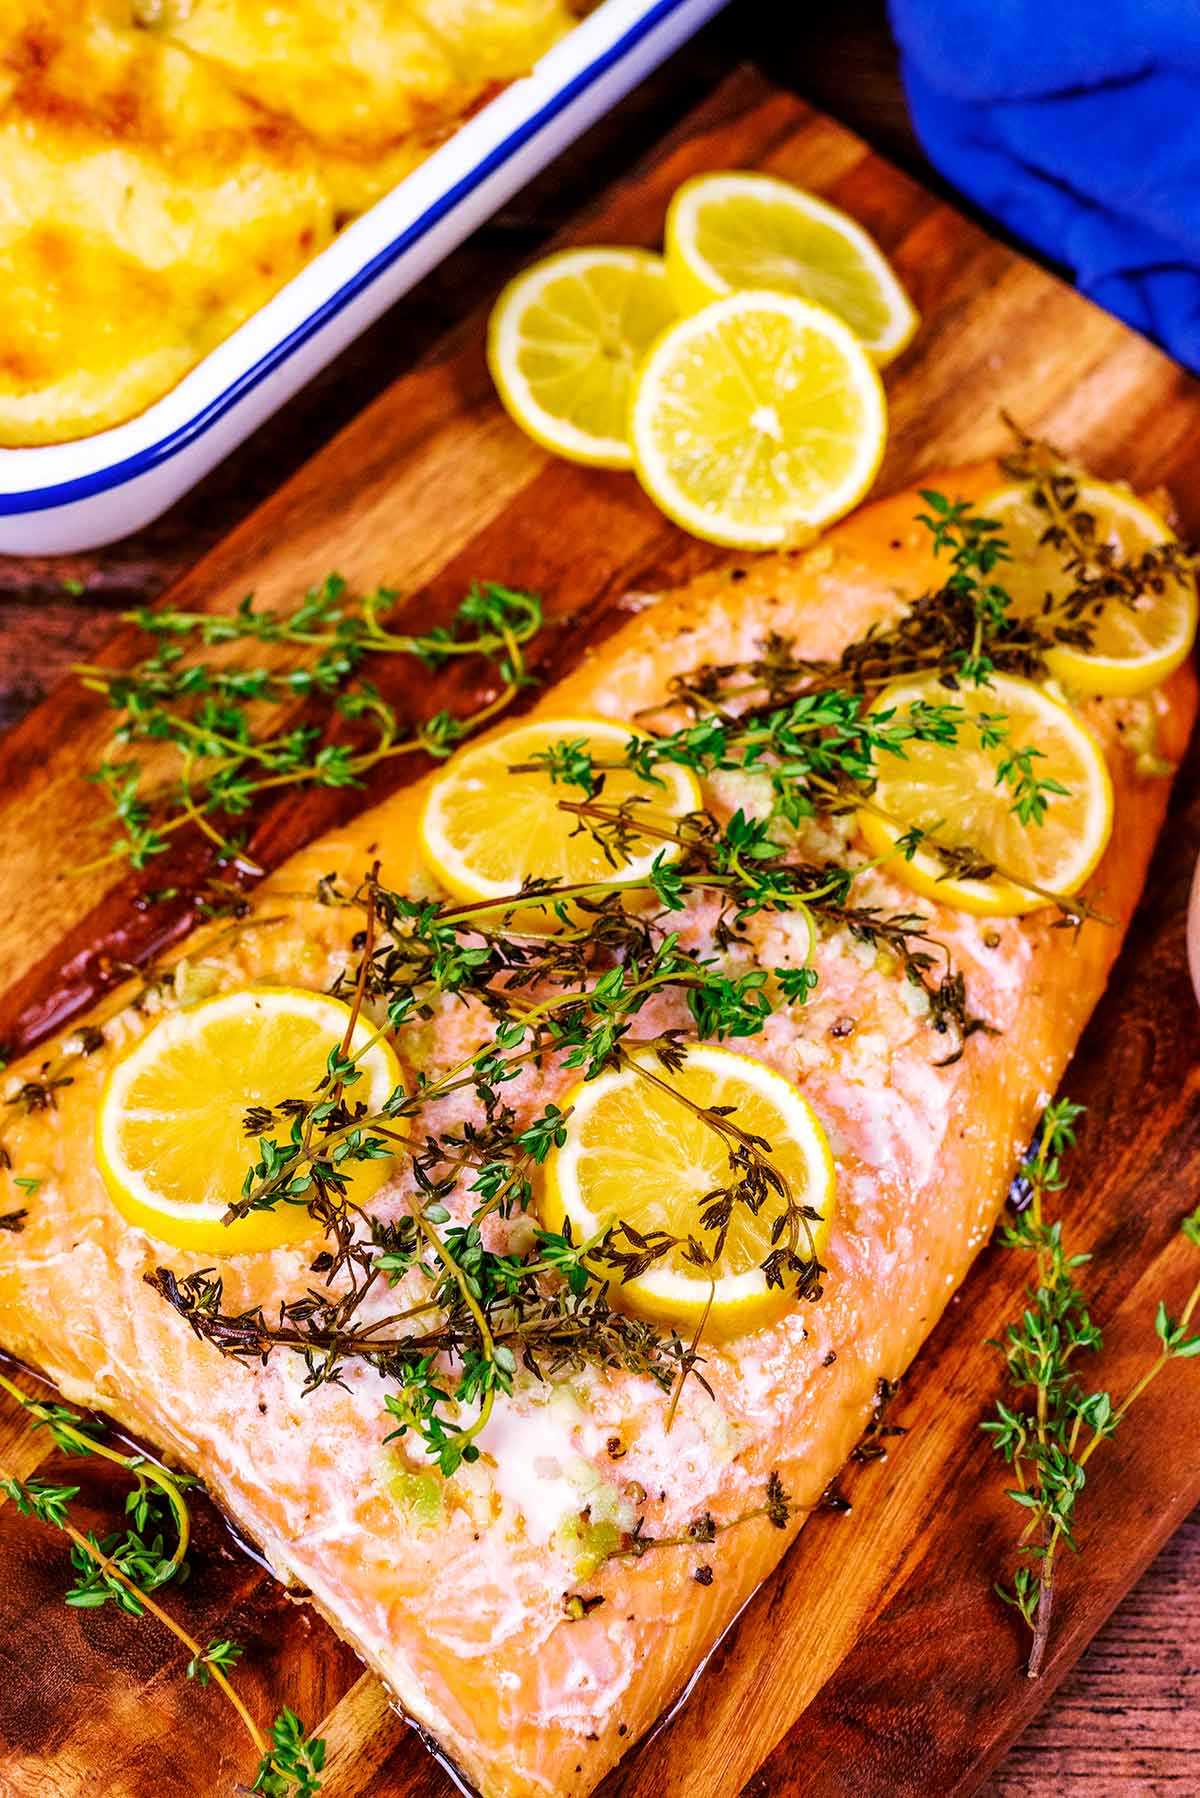 Baked salmon on a board in front of a tray of mashed potatoes.